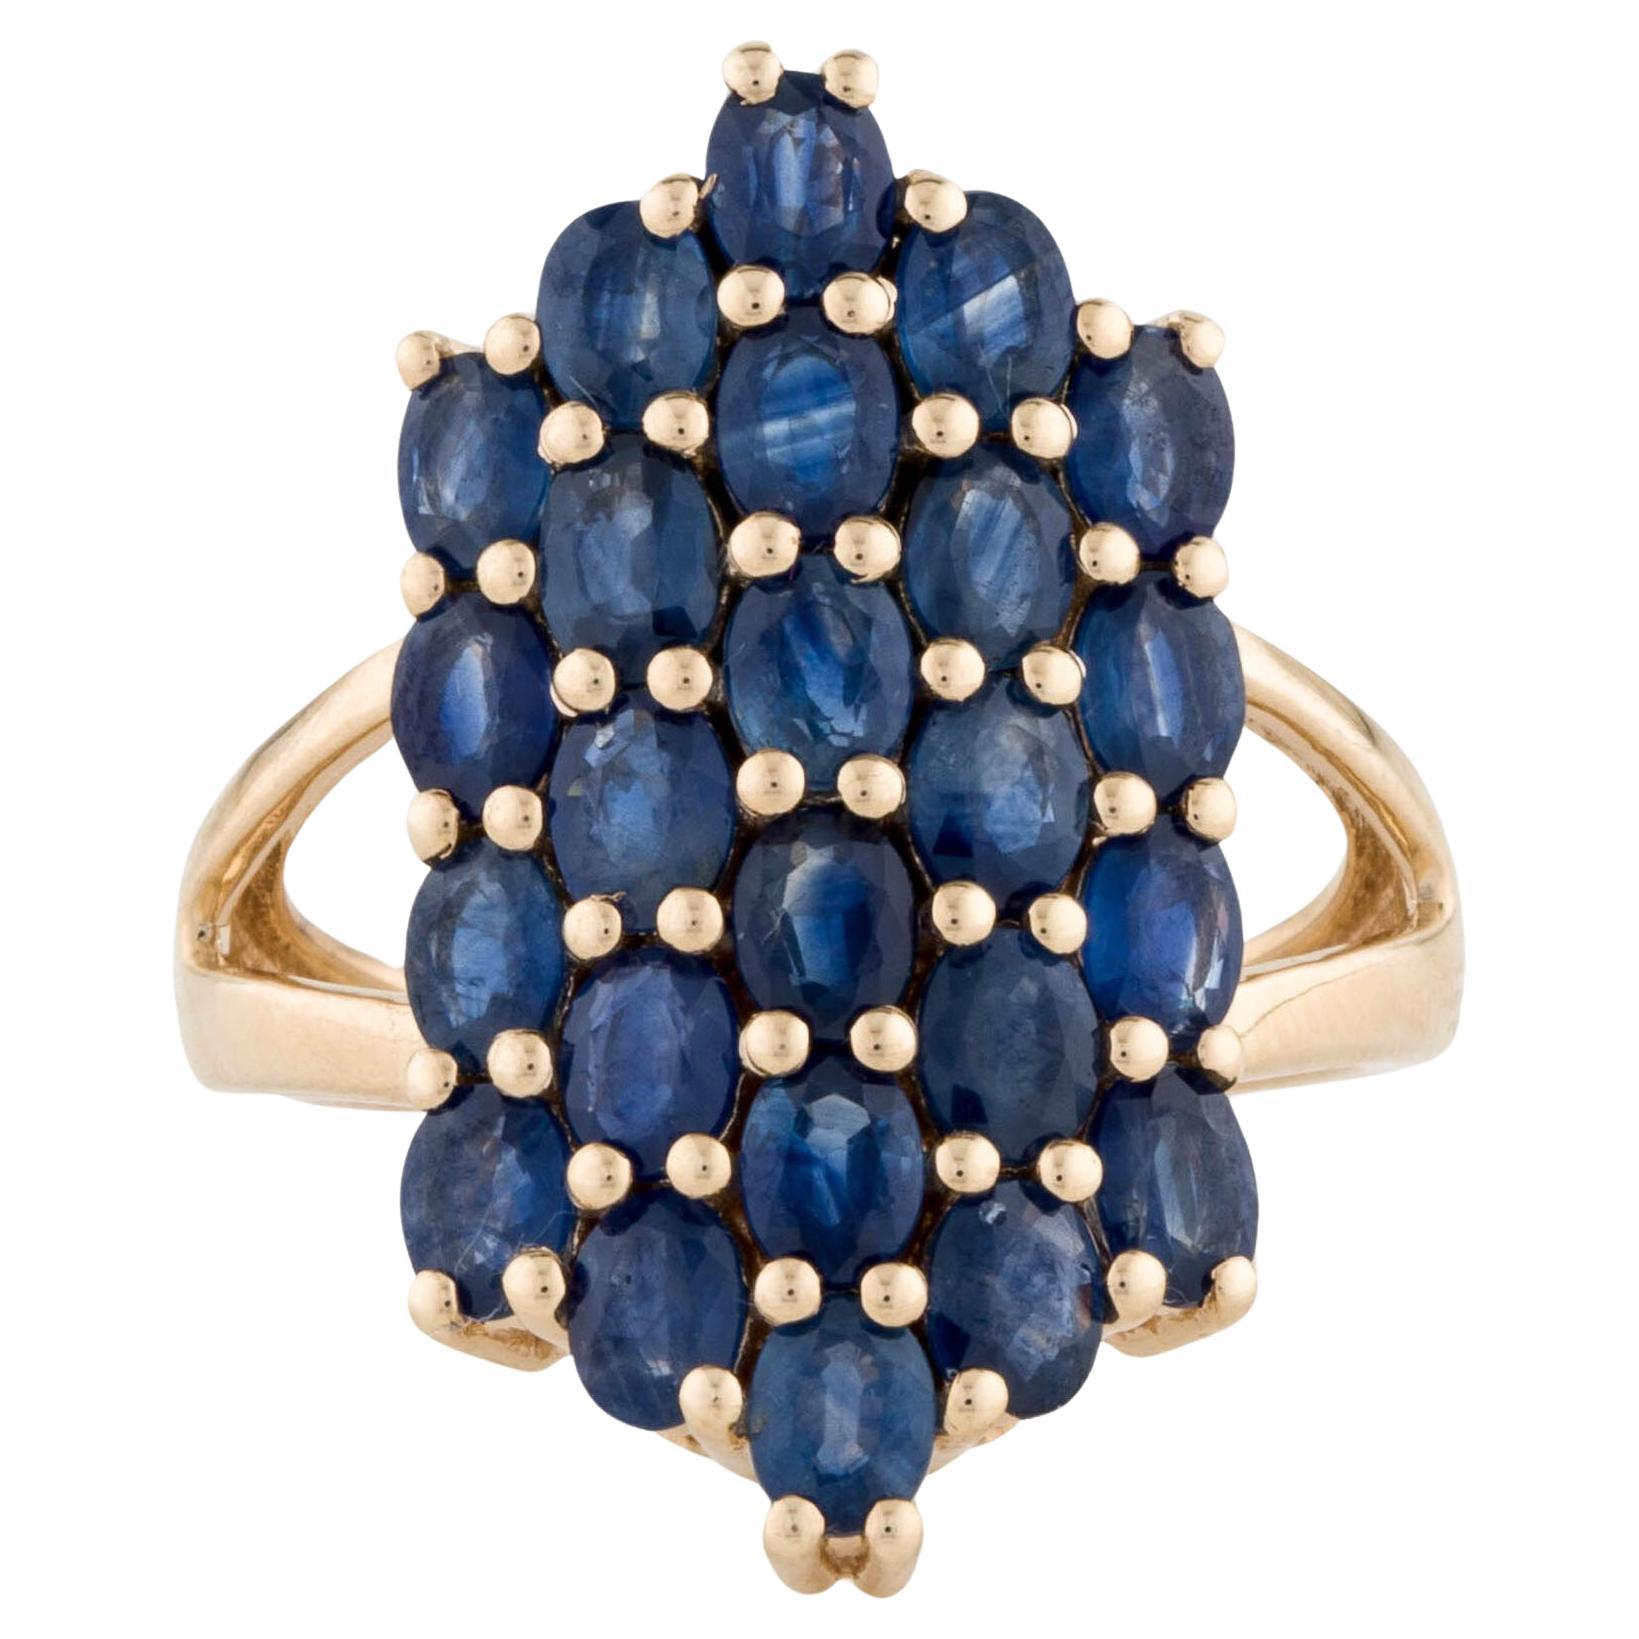 Luxueuse bague cocktail en saphir 14 carats, 4,81 ctw, taille 6,75 - Statement Jewelry